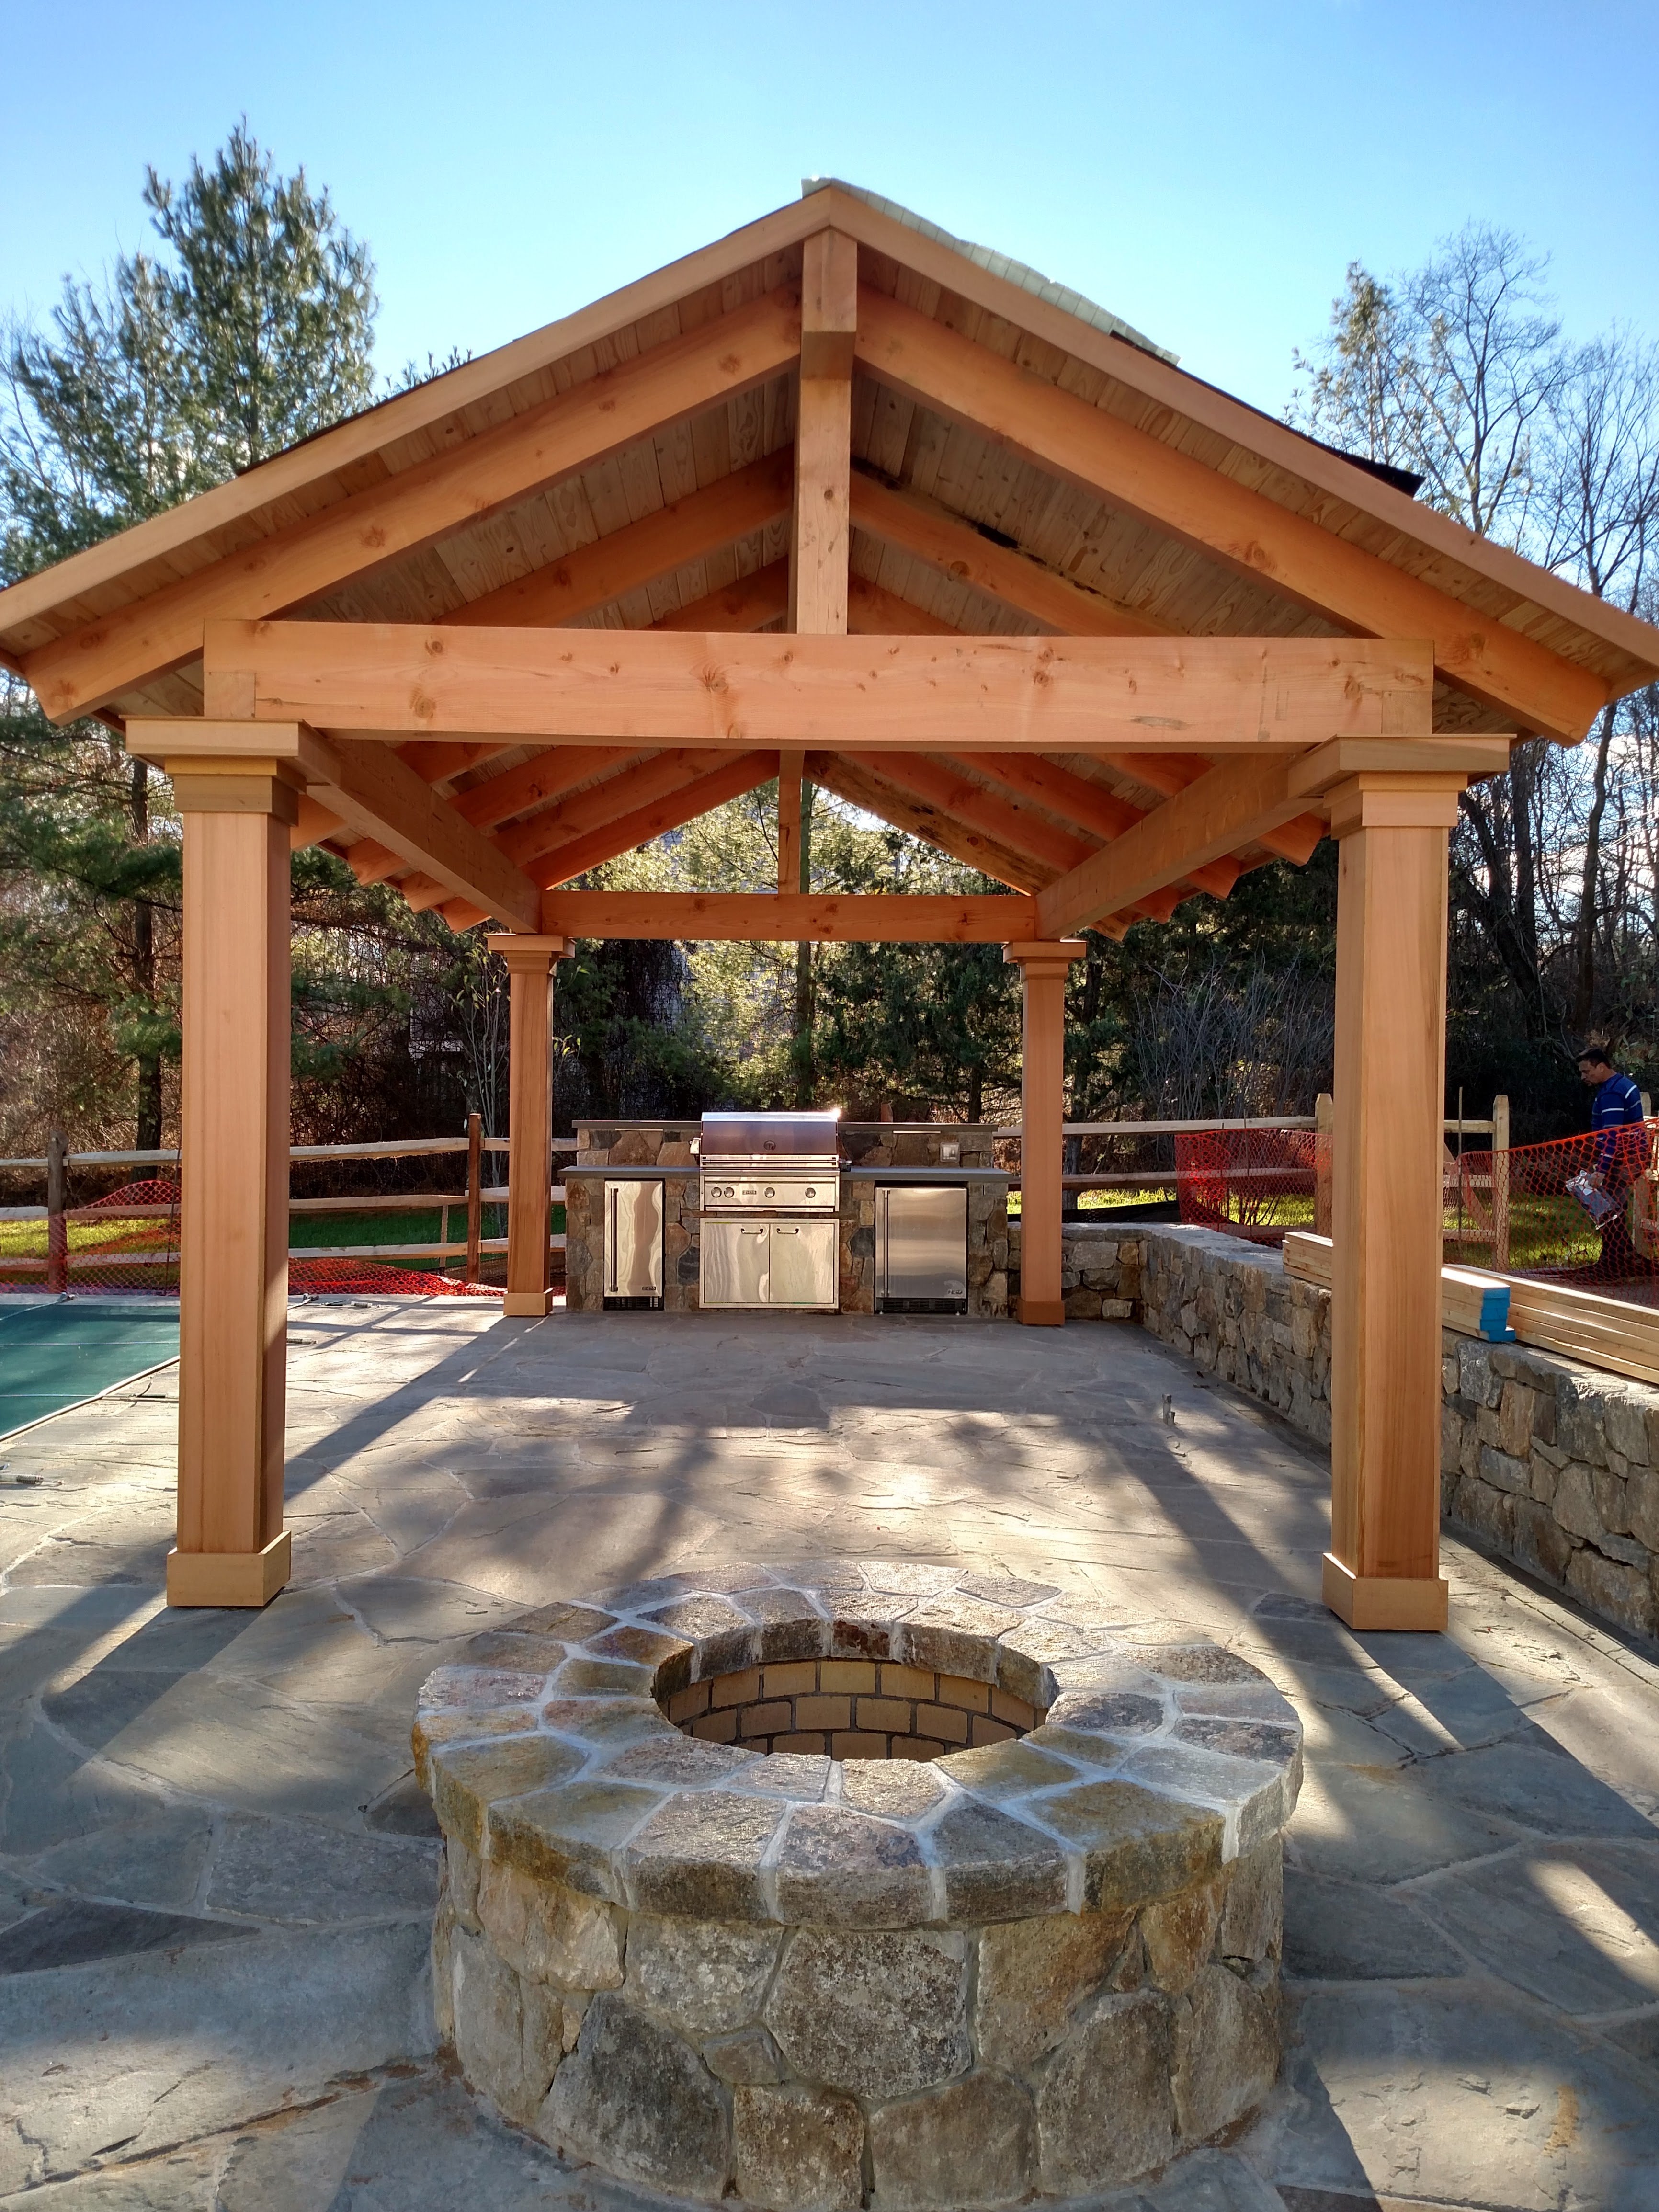 wood cover area with fire pit and room for outdoor seating